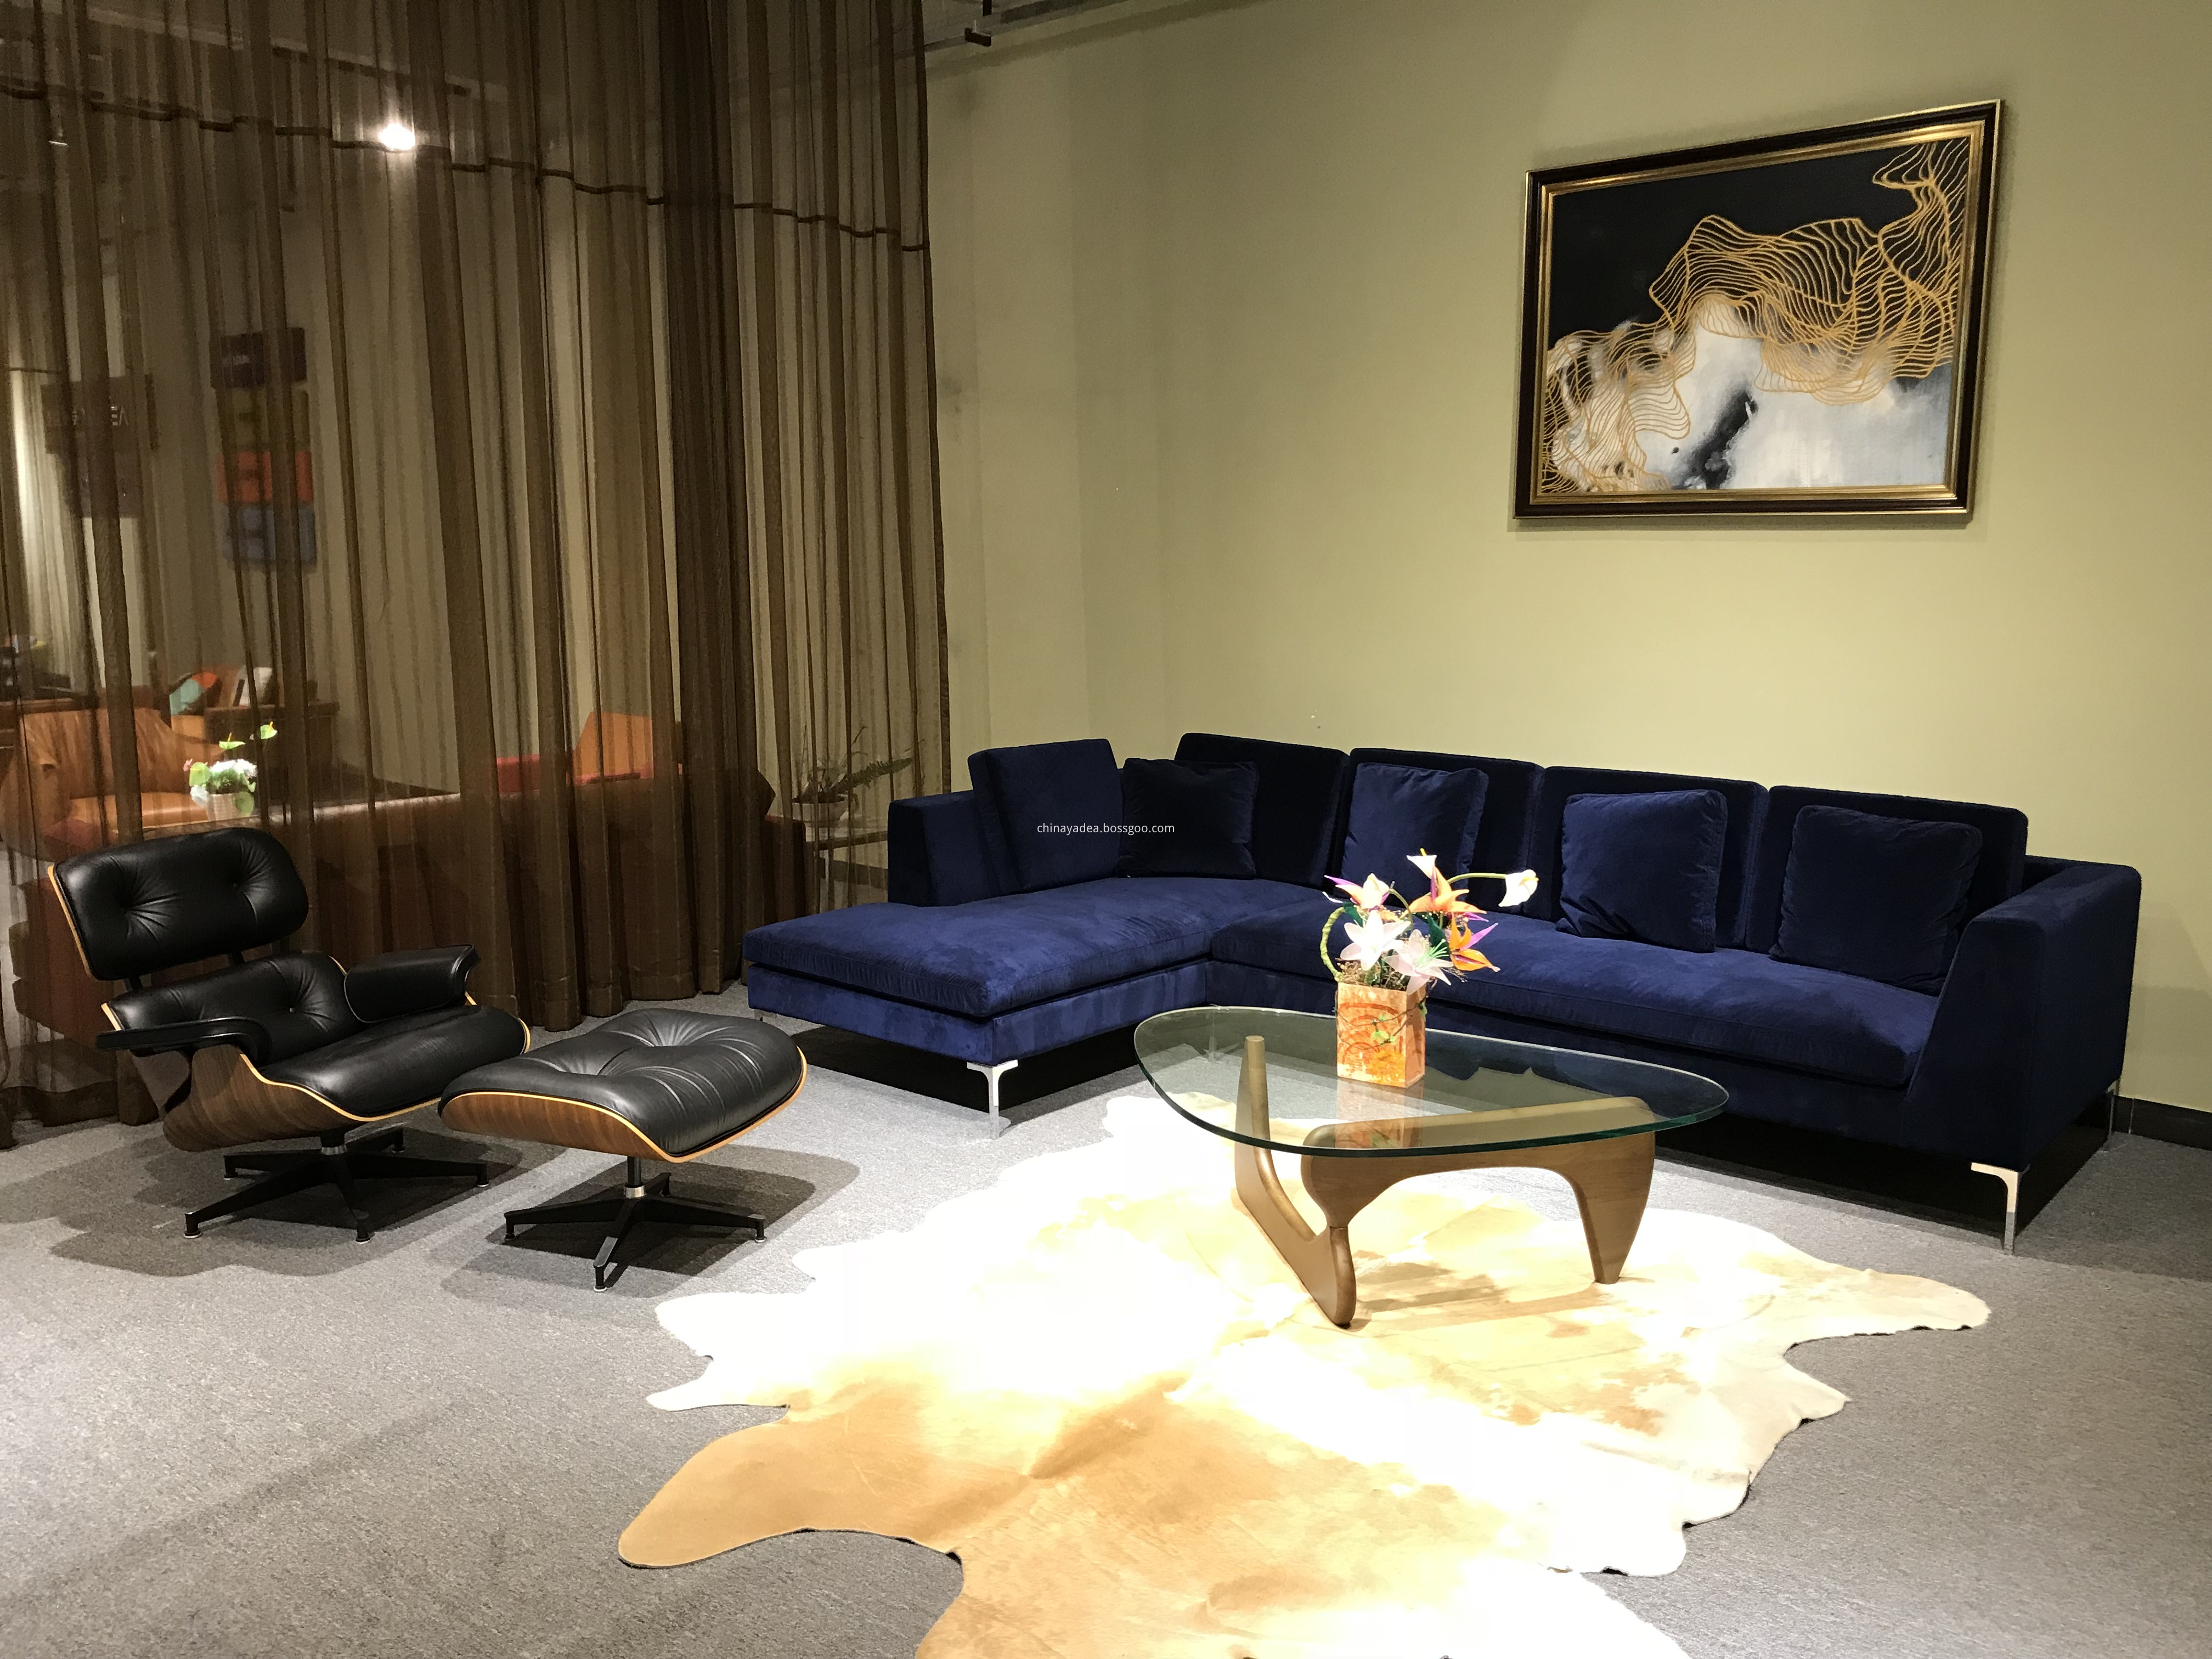 Eames Lounge Chair Replica In The Showroom Of Yadea